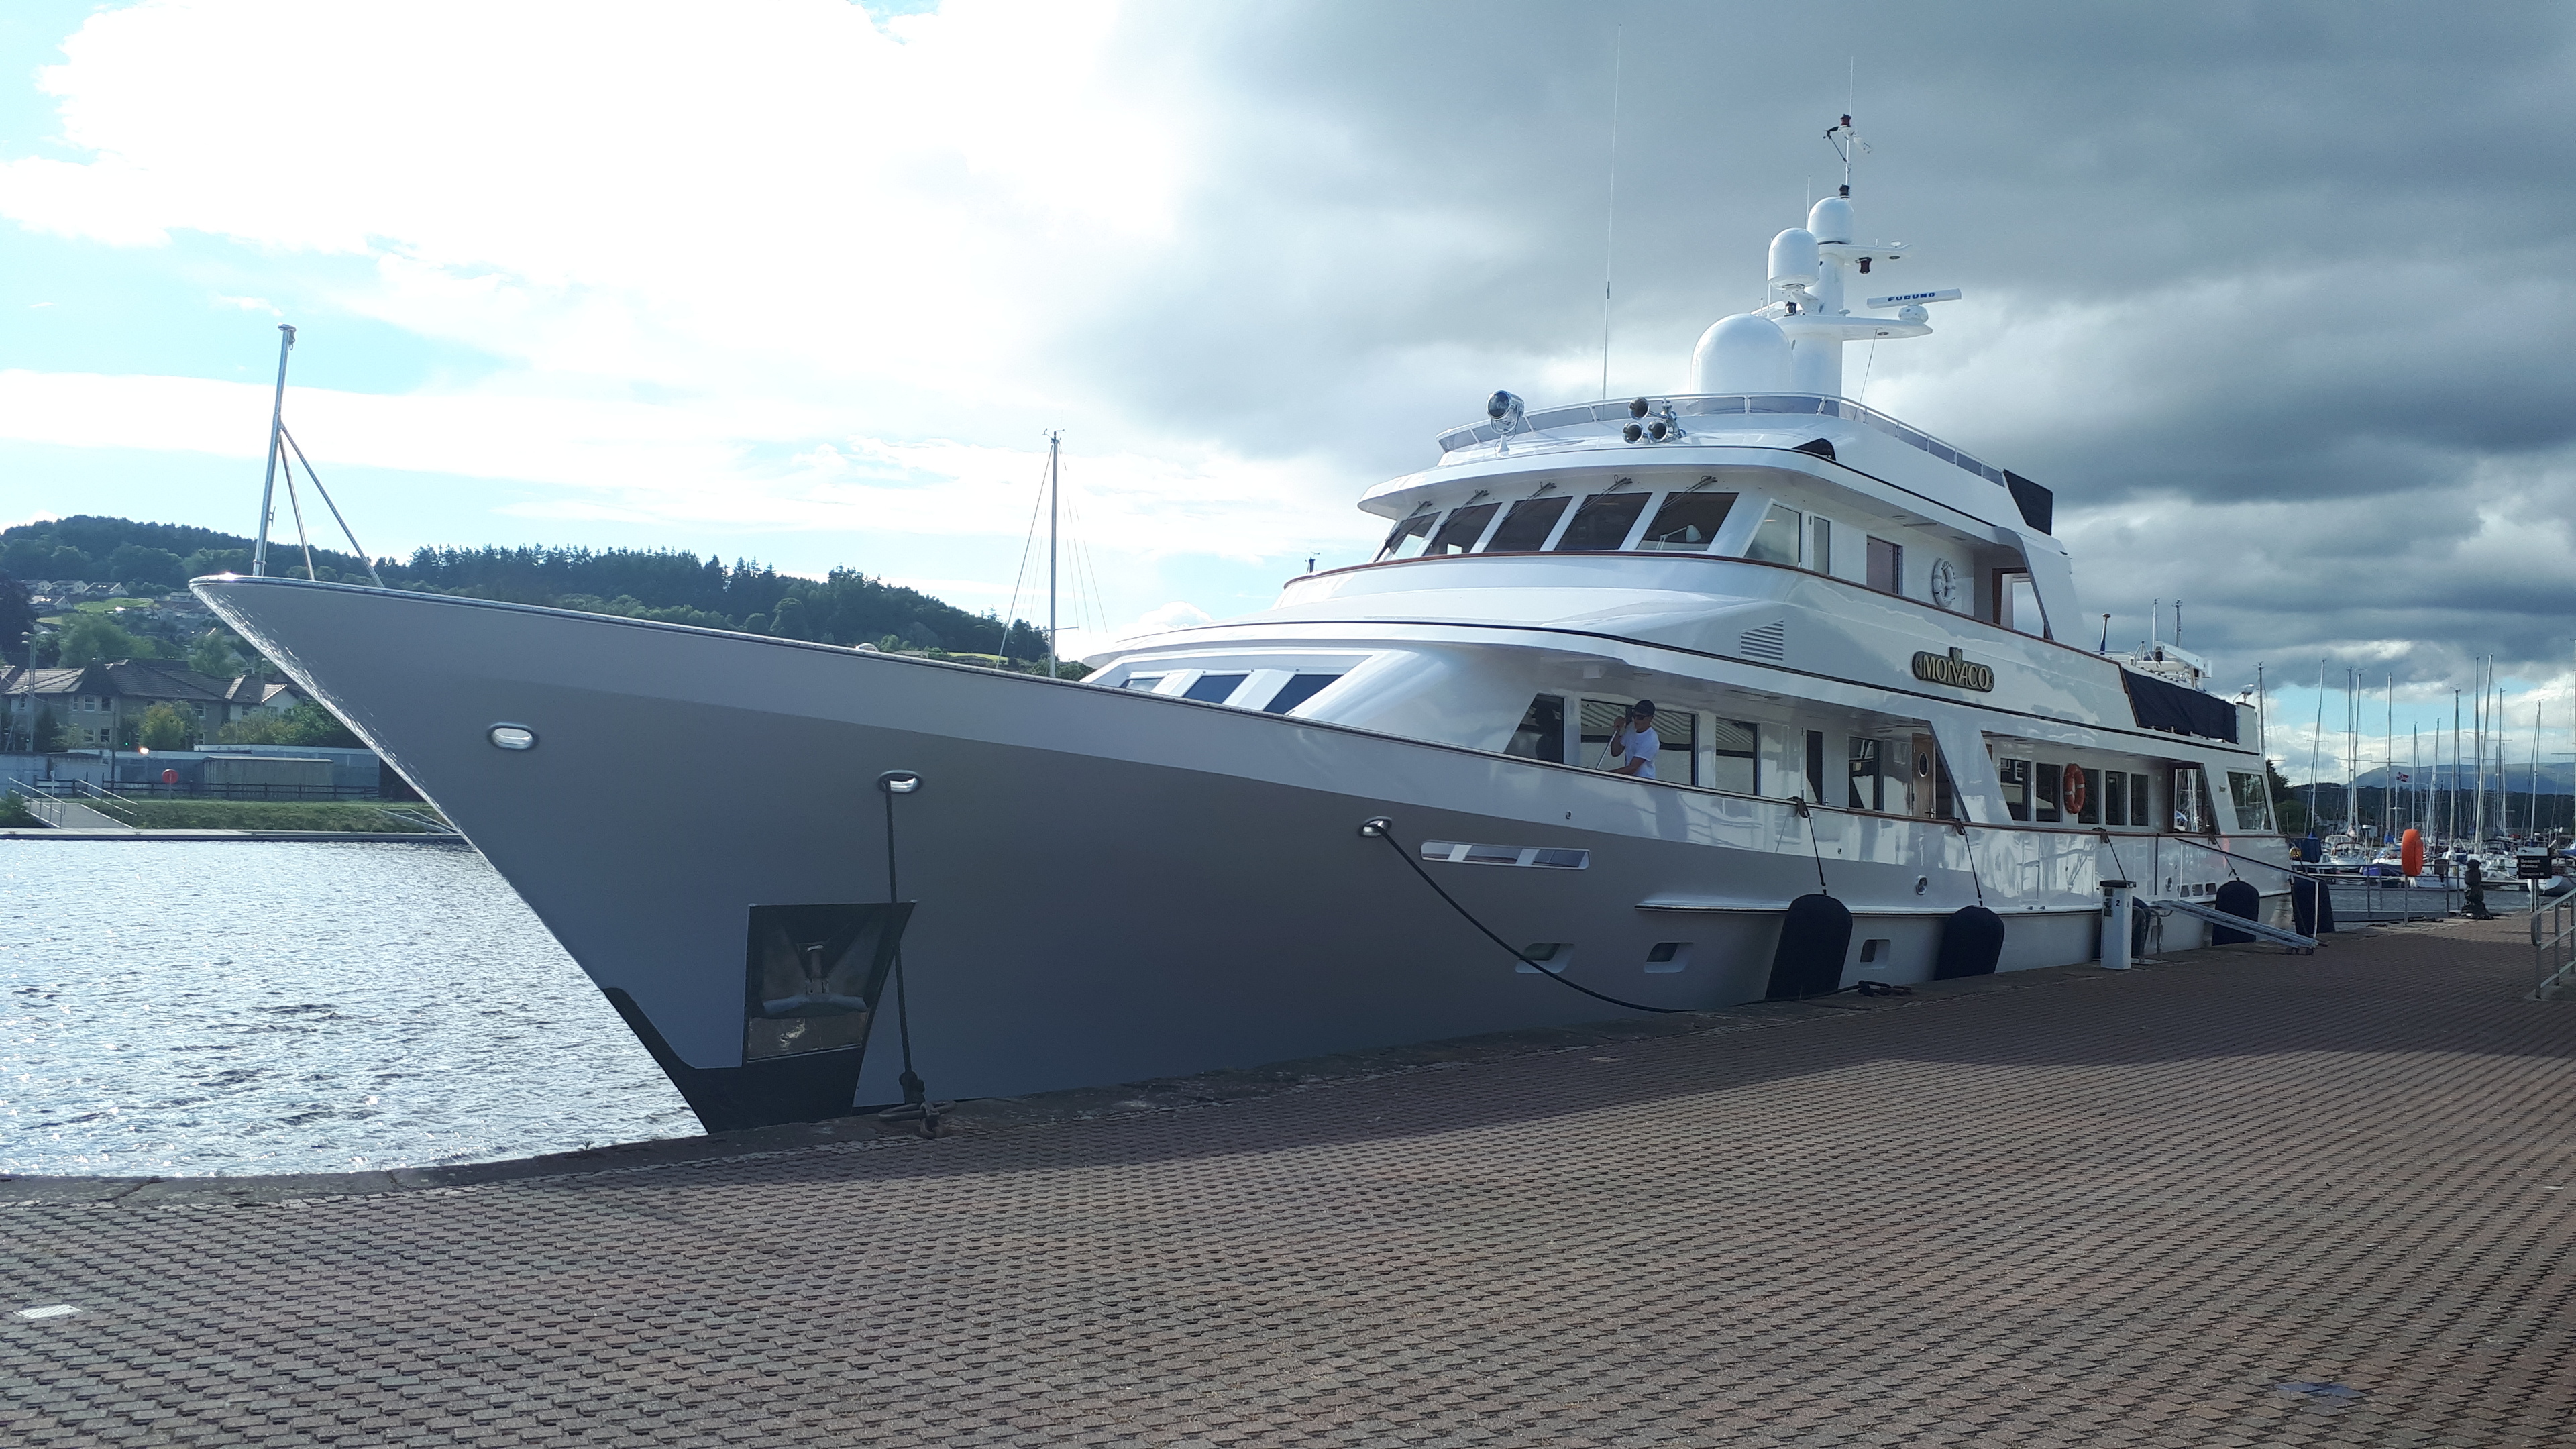 The yacht Monaco berthed at Inverness on a tour of the Highlands